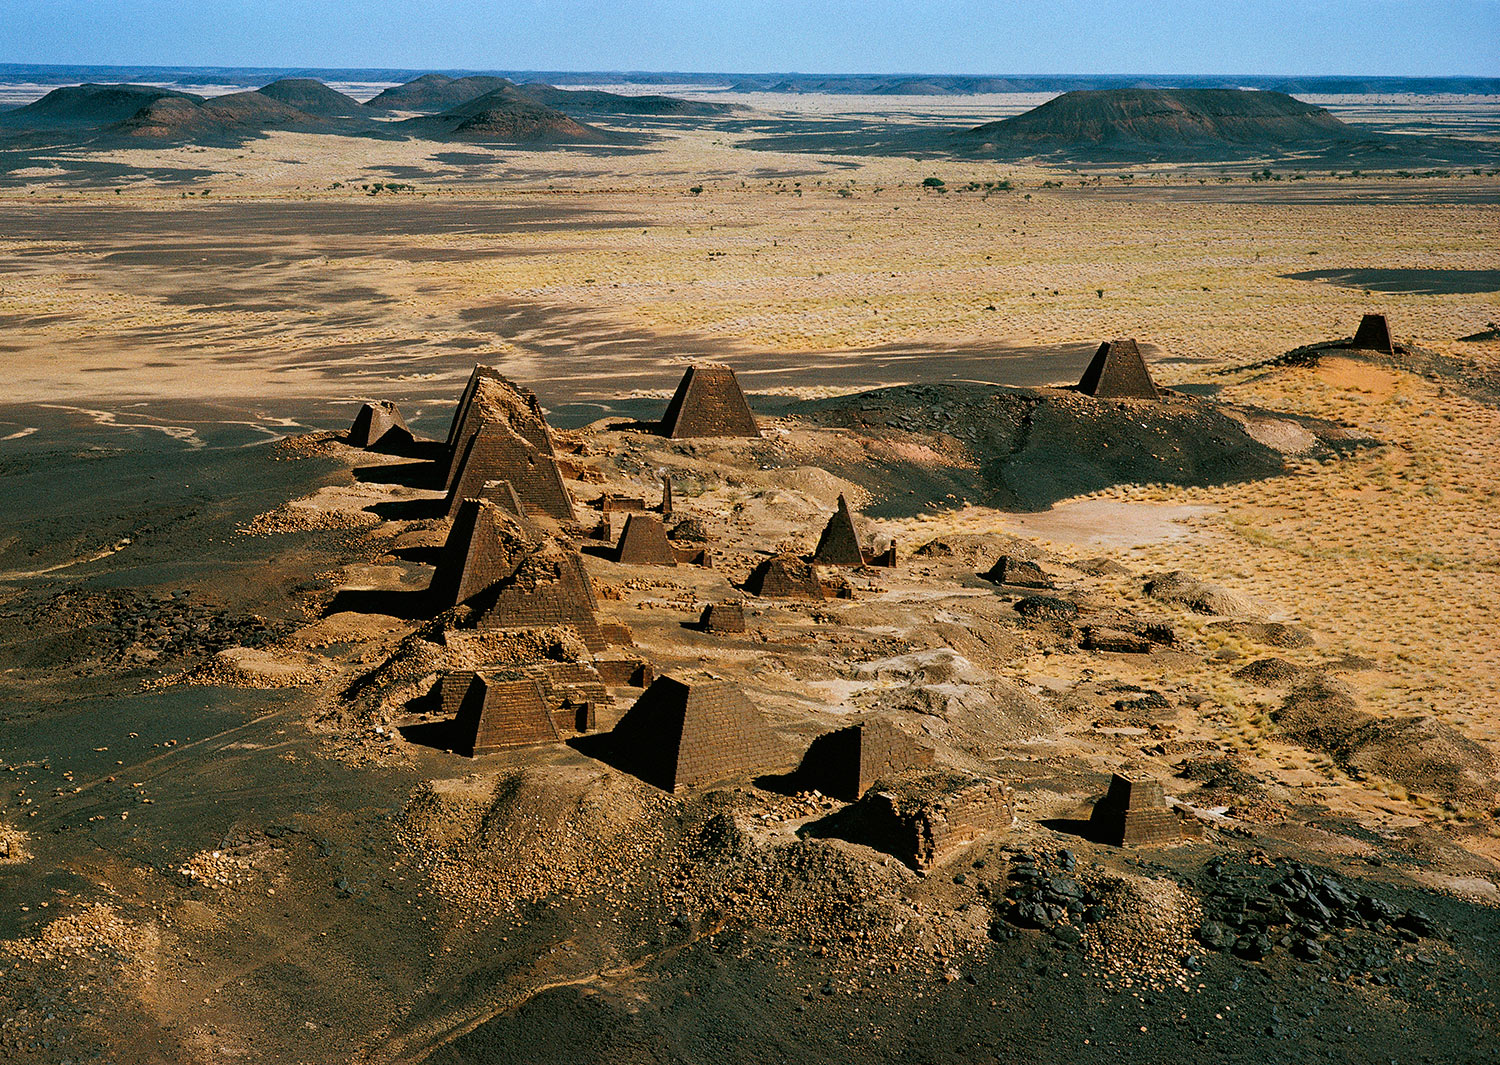 Funeral pyramids and temples from the Kingdom of Kush dating from 800 BC to AD 350 at Meroe, Sudan